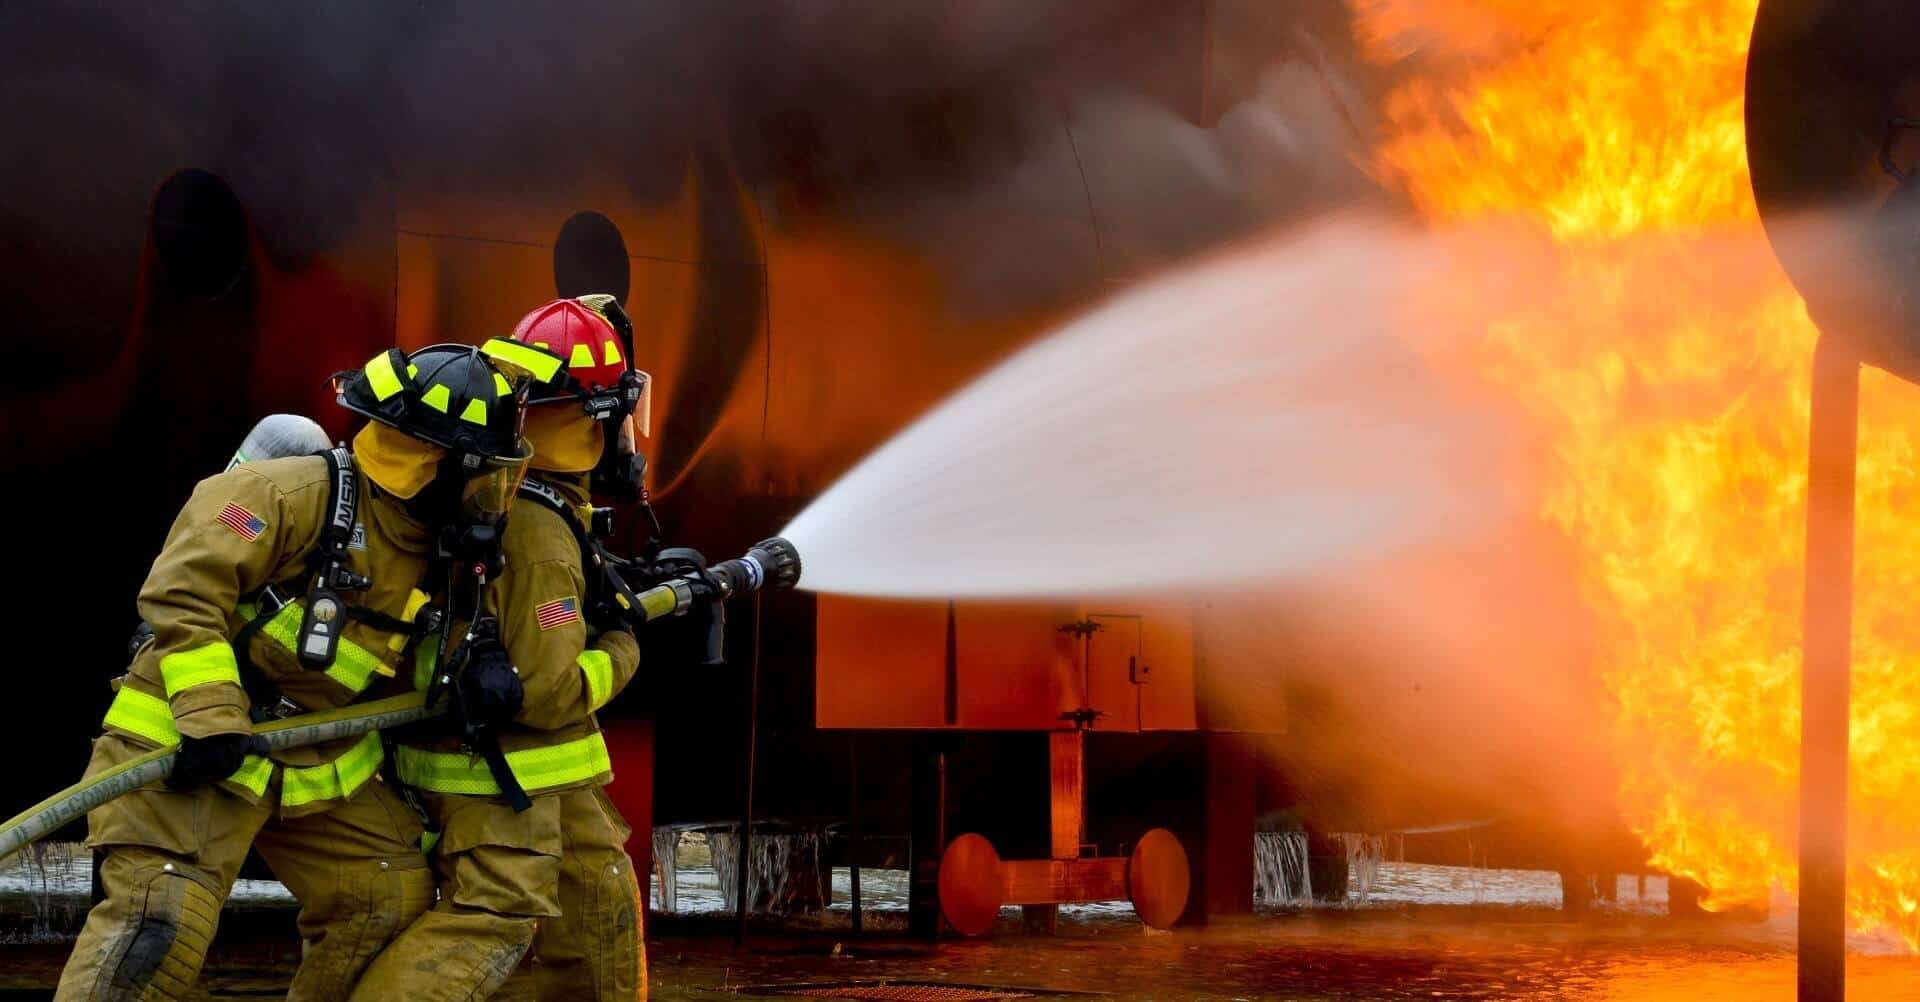 A fire fighter putting out a fire by using a hose